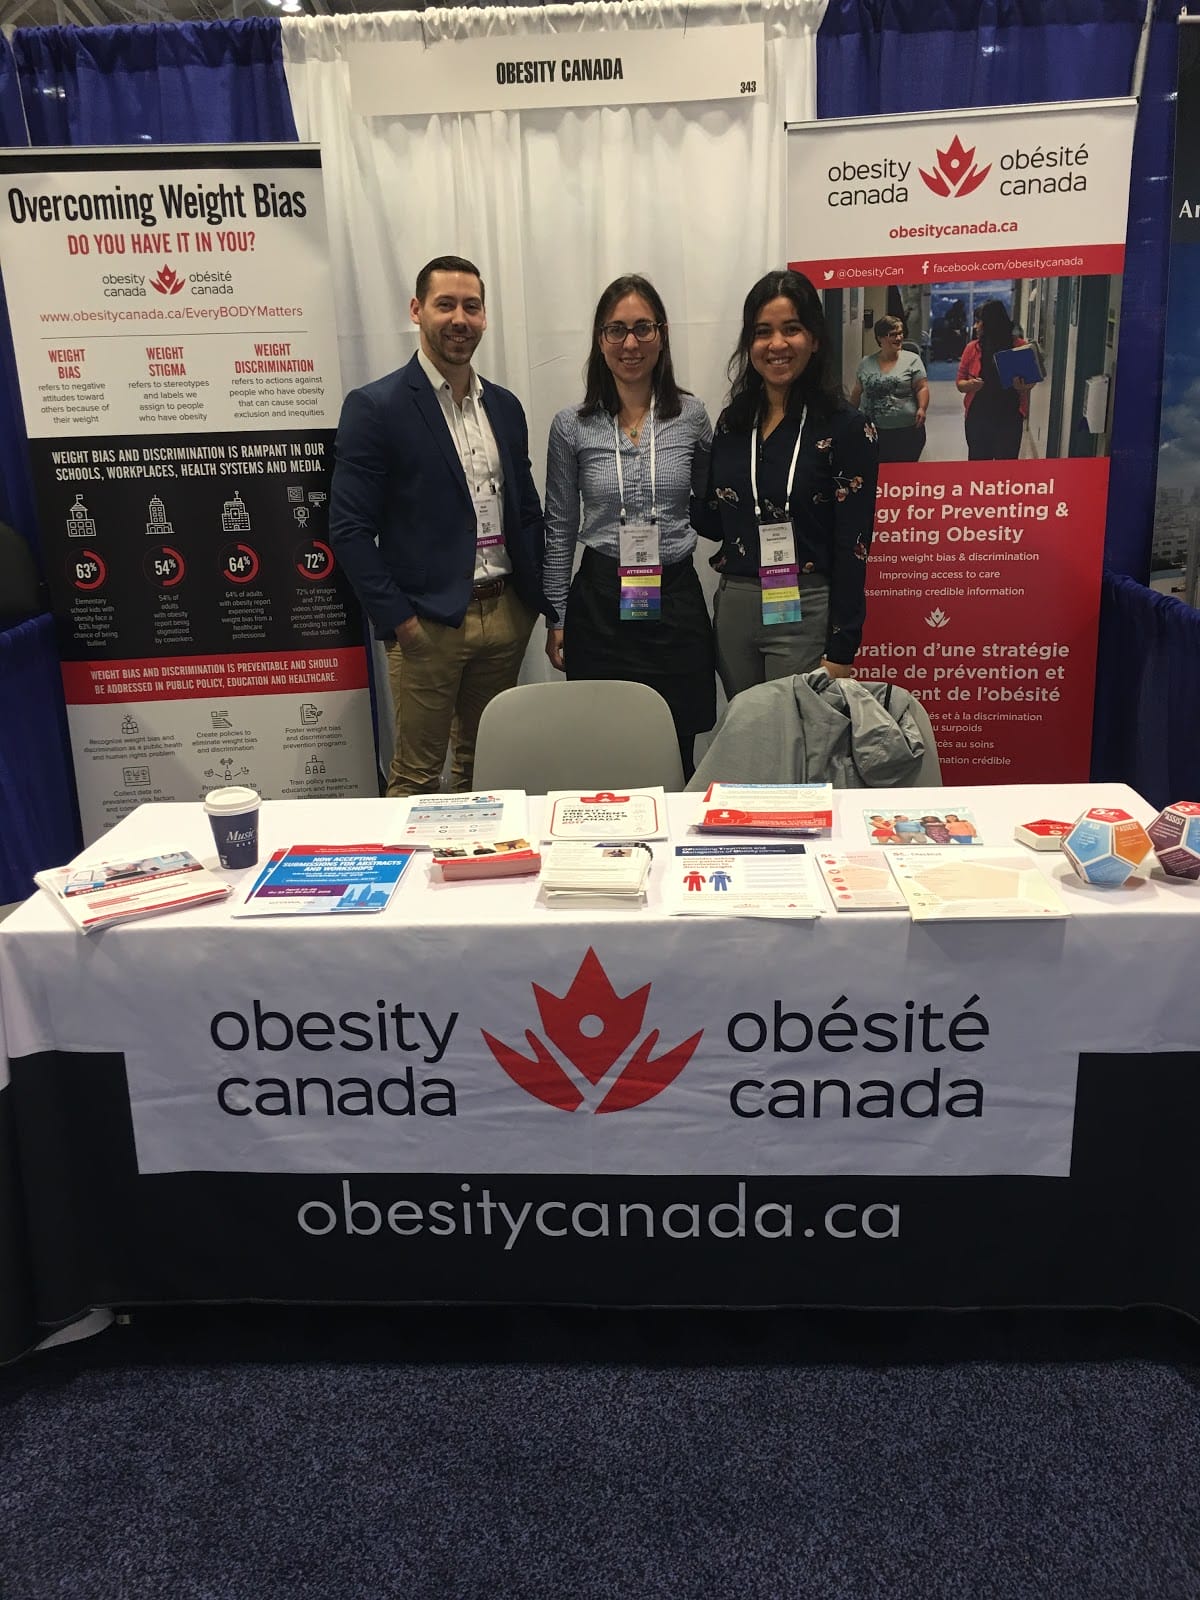 Three people stand behind an obesity canada informational booth at a conference, smiling, surrounded by educational materials and banners.